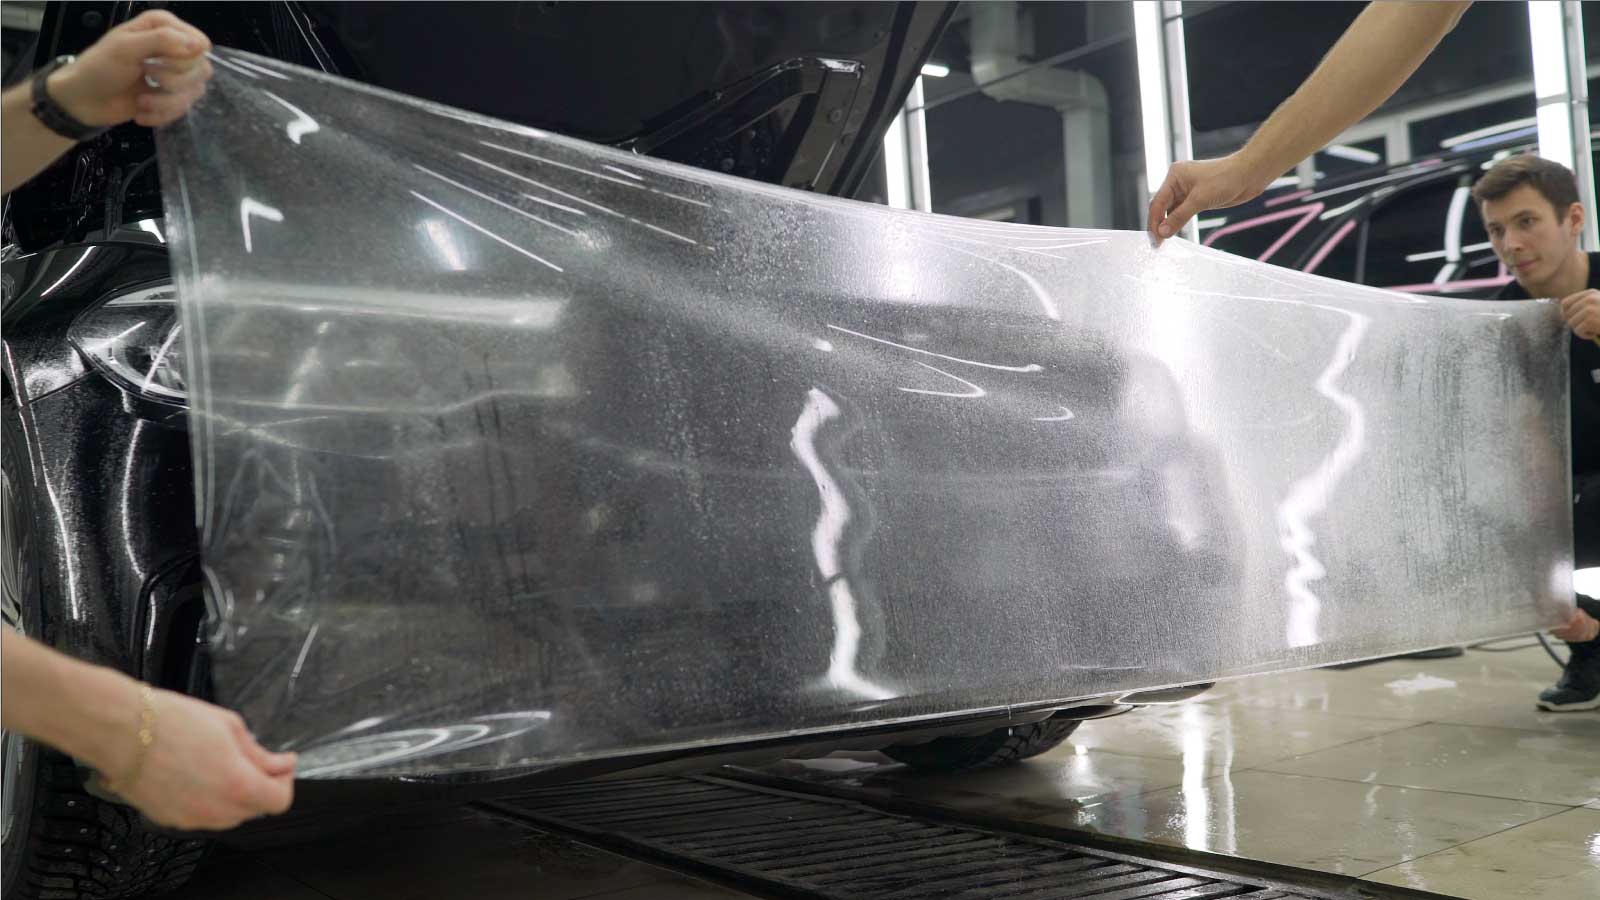 two installers holding paint protection film before applying it to the bumper of a vehicle